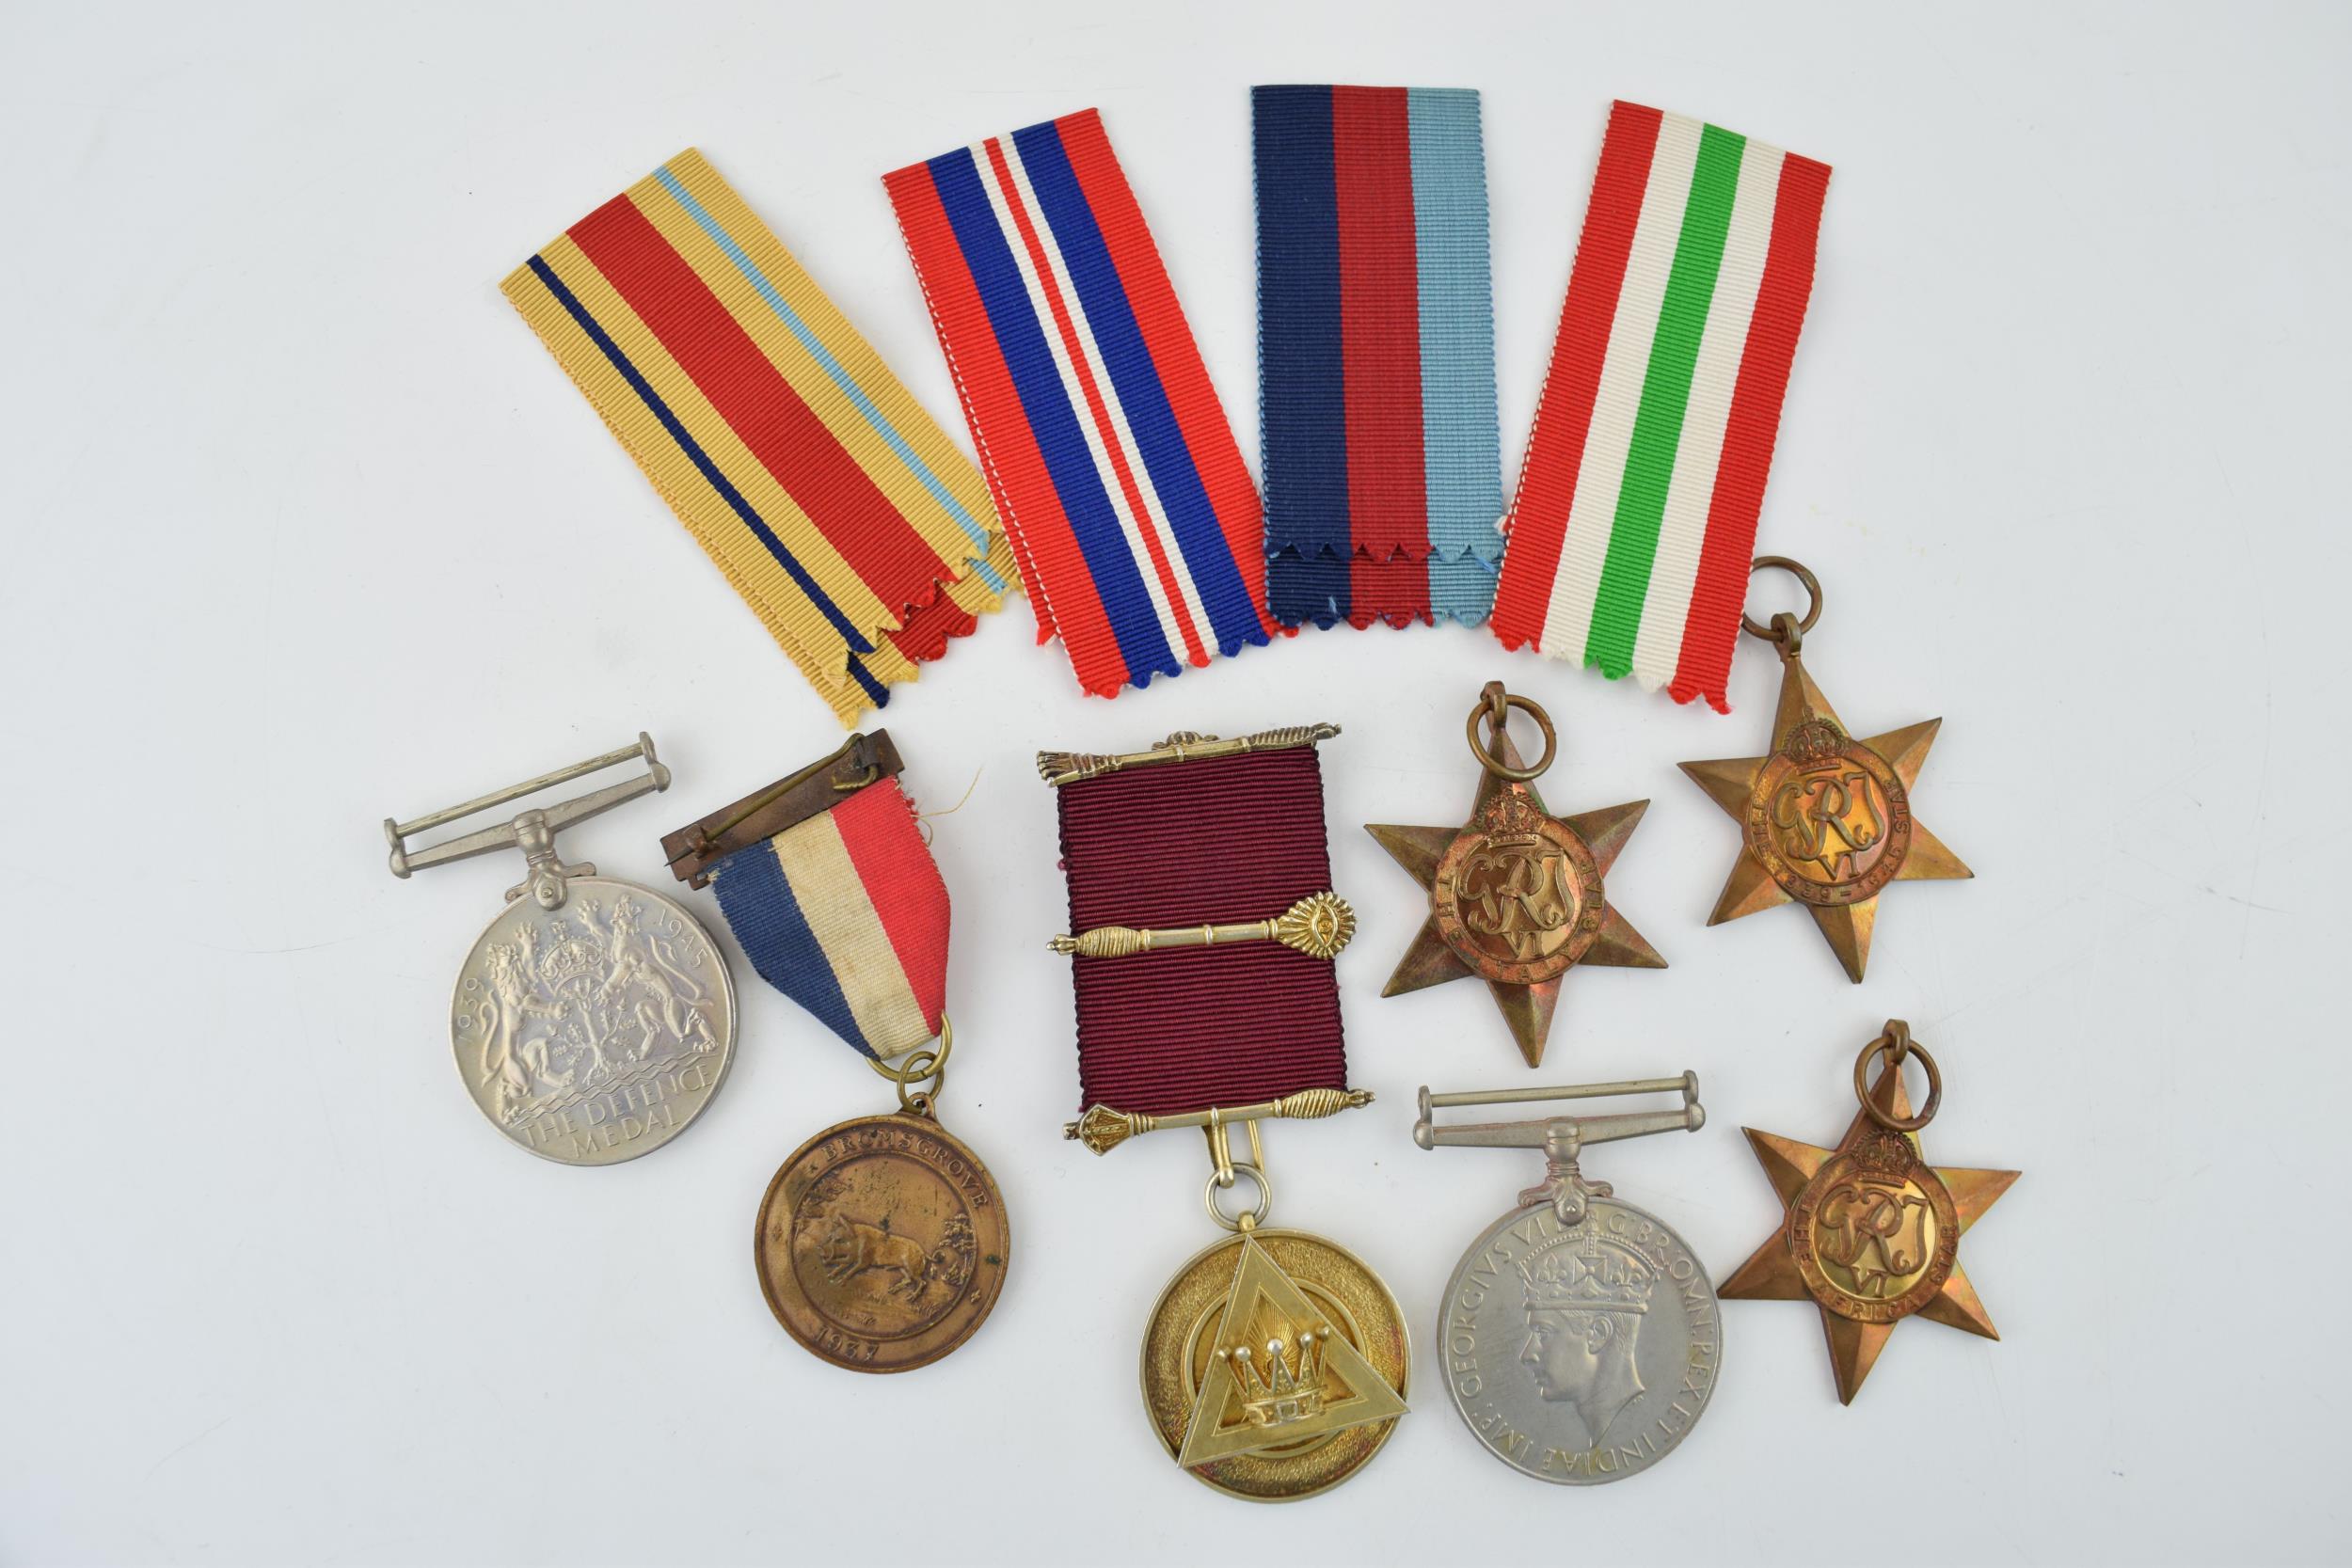 A collection of WWII medals (5) in original paper sleeves together with a silver Masonic medal and a